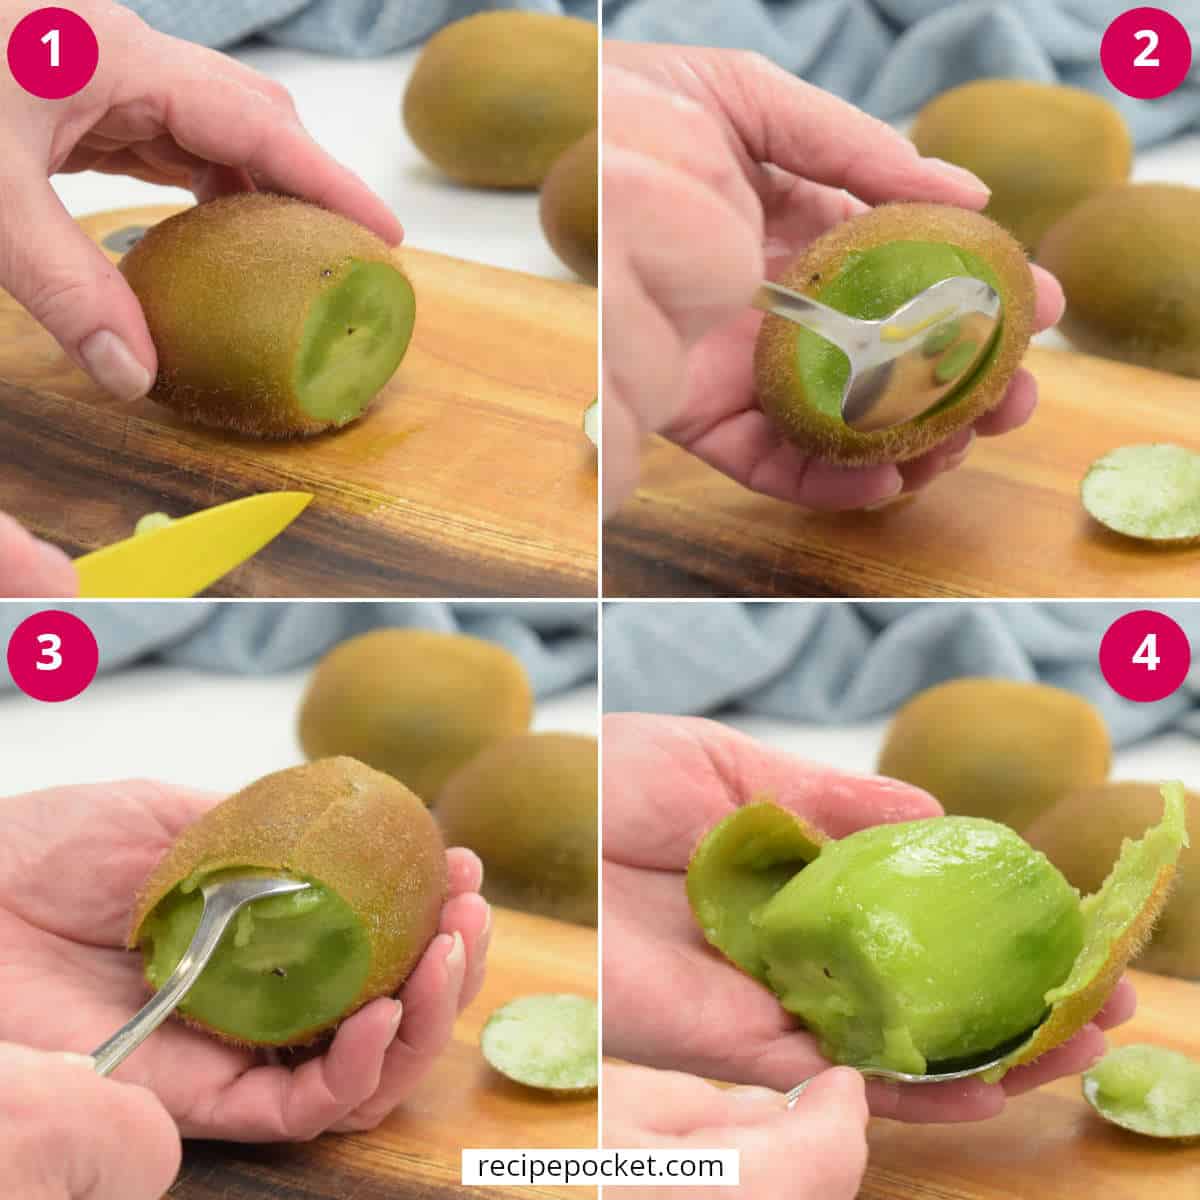 Image showing how to peel a kiwi fruit with a spoon.